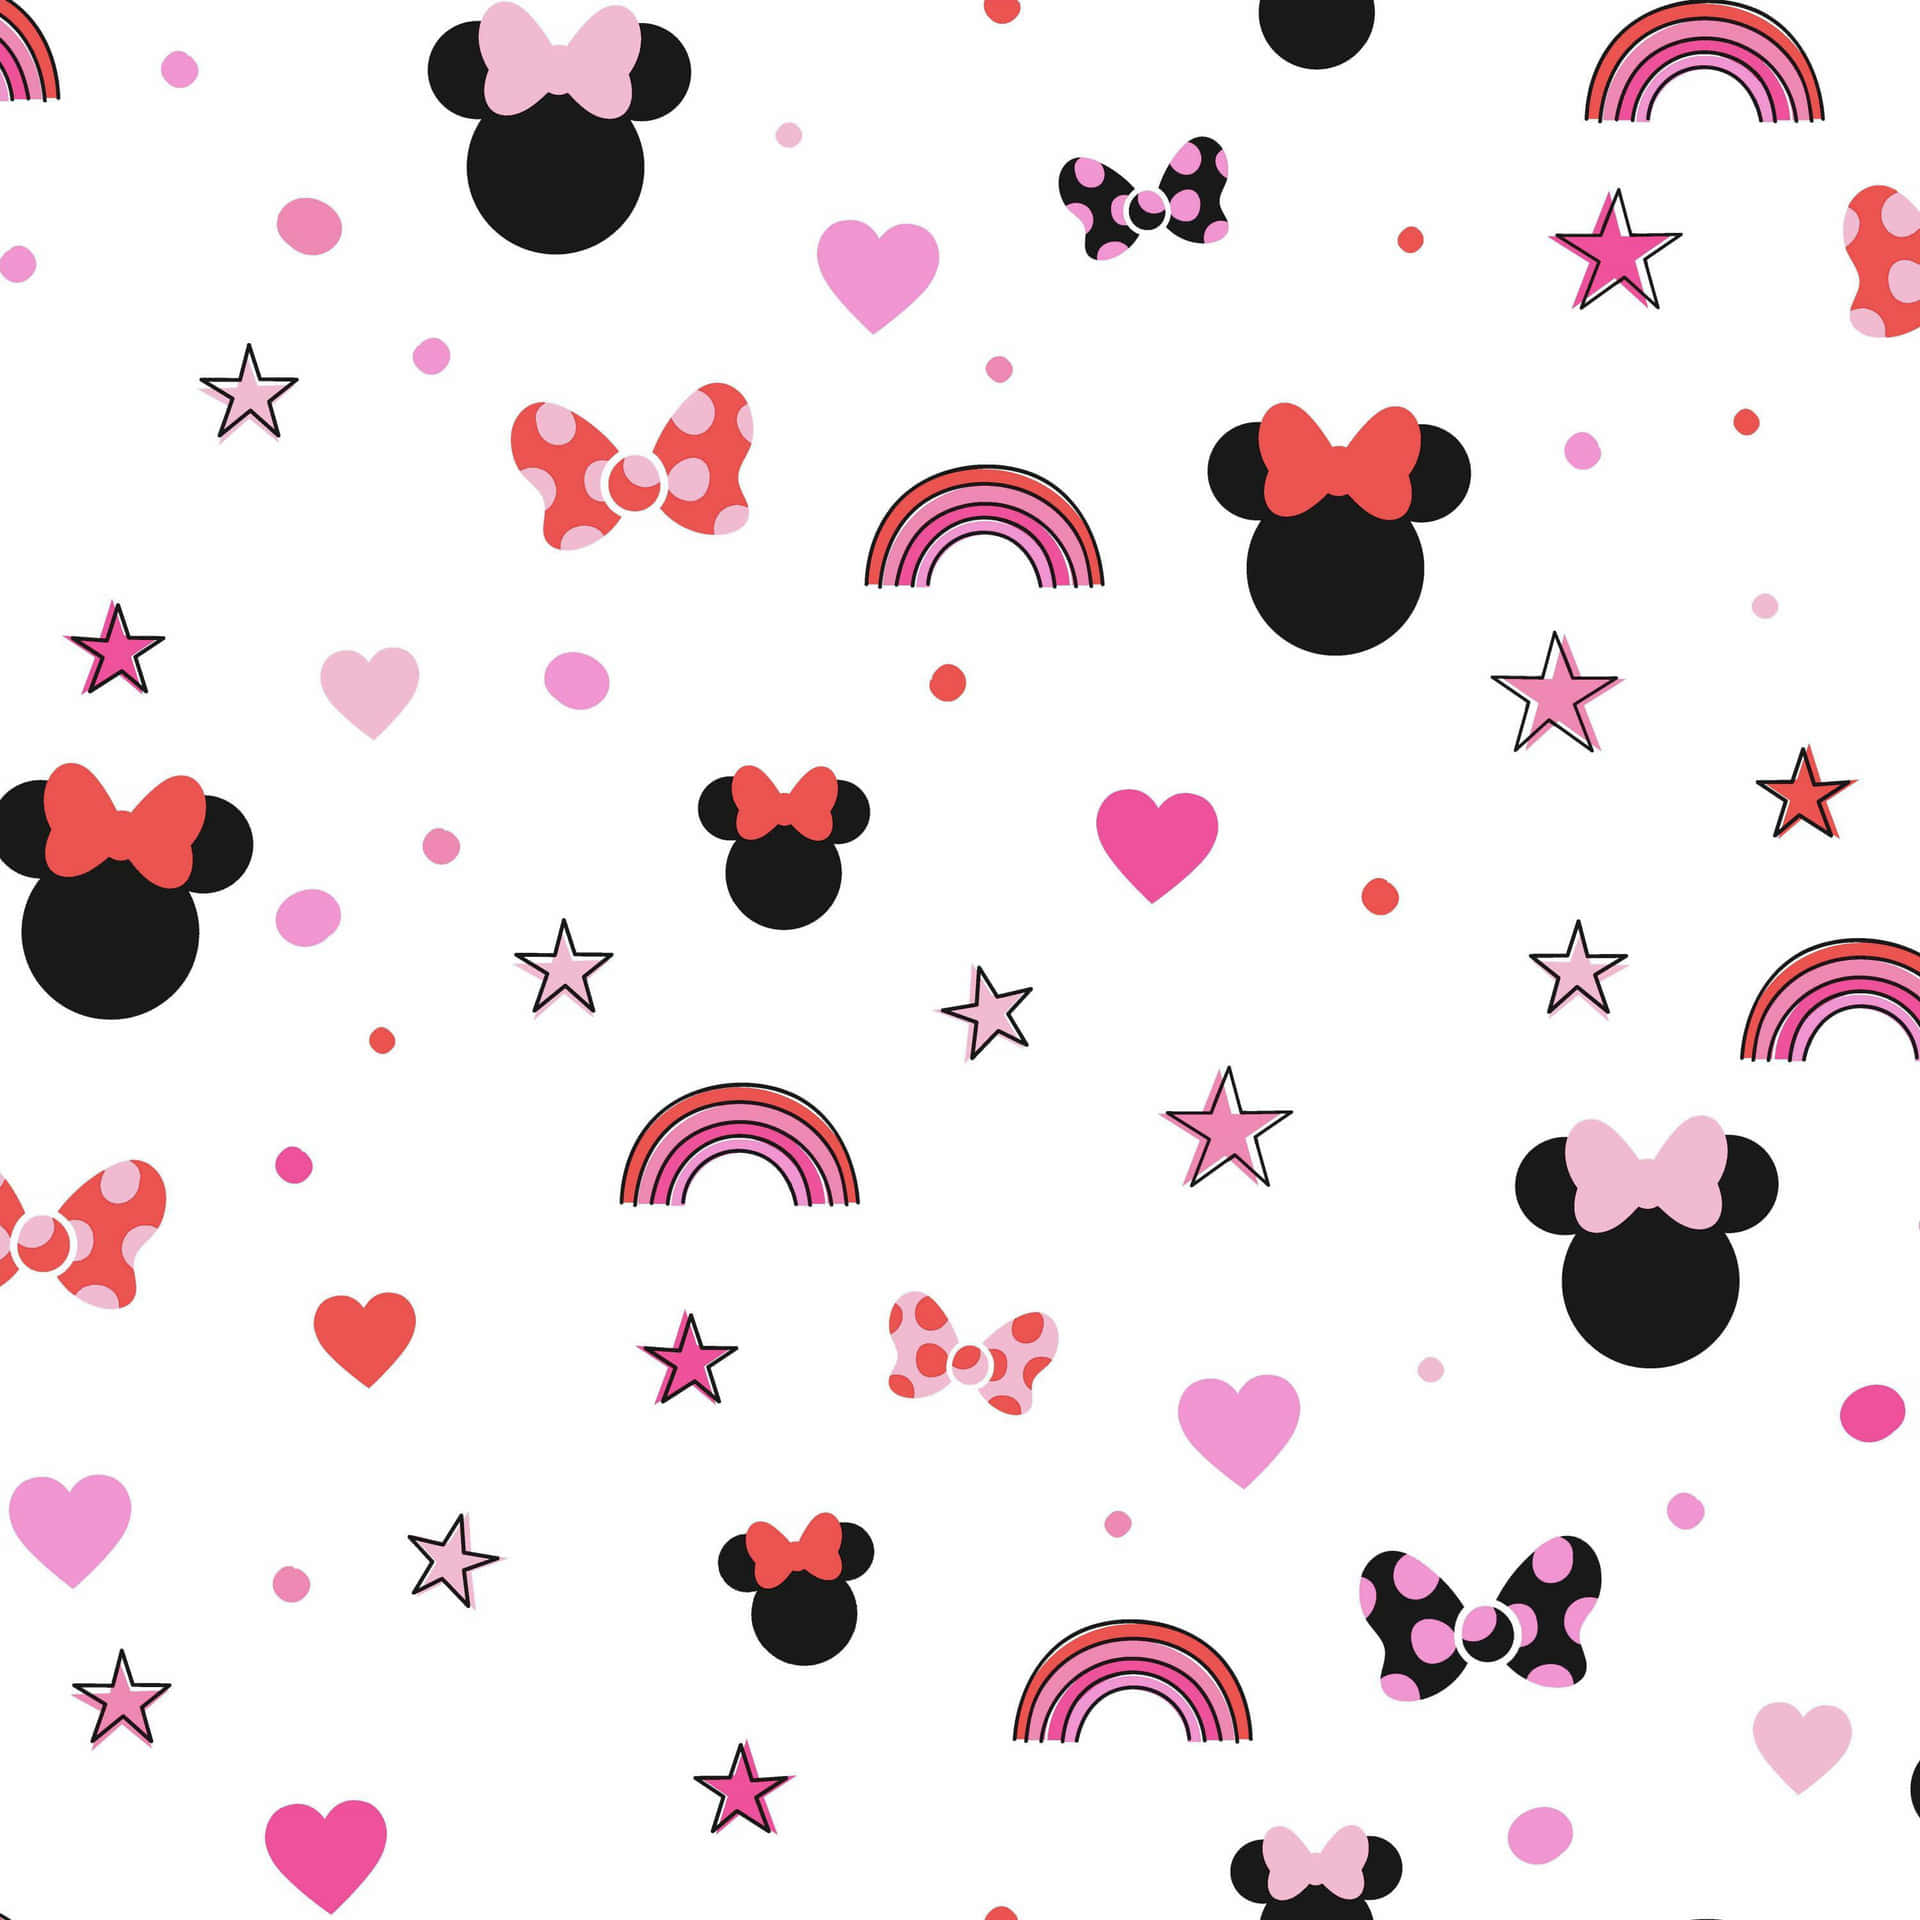 The Fun-Loving Minnie Mouse